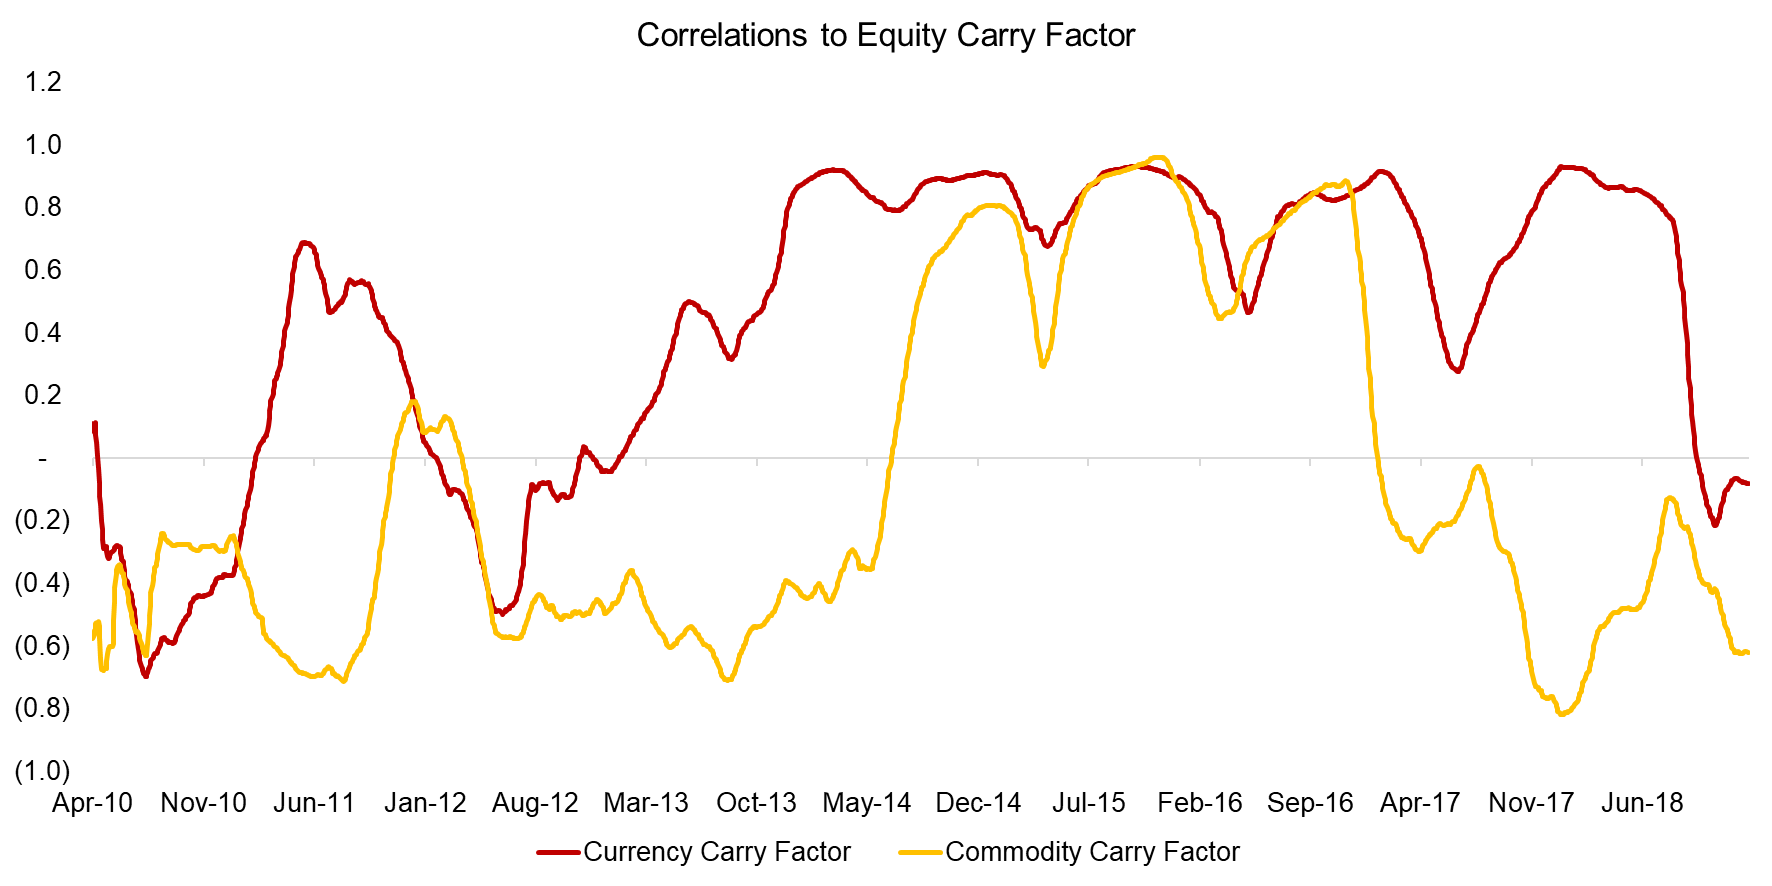 Correlations to Equity Carry Factor